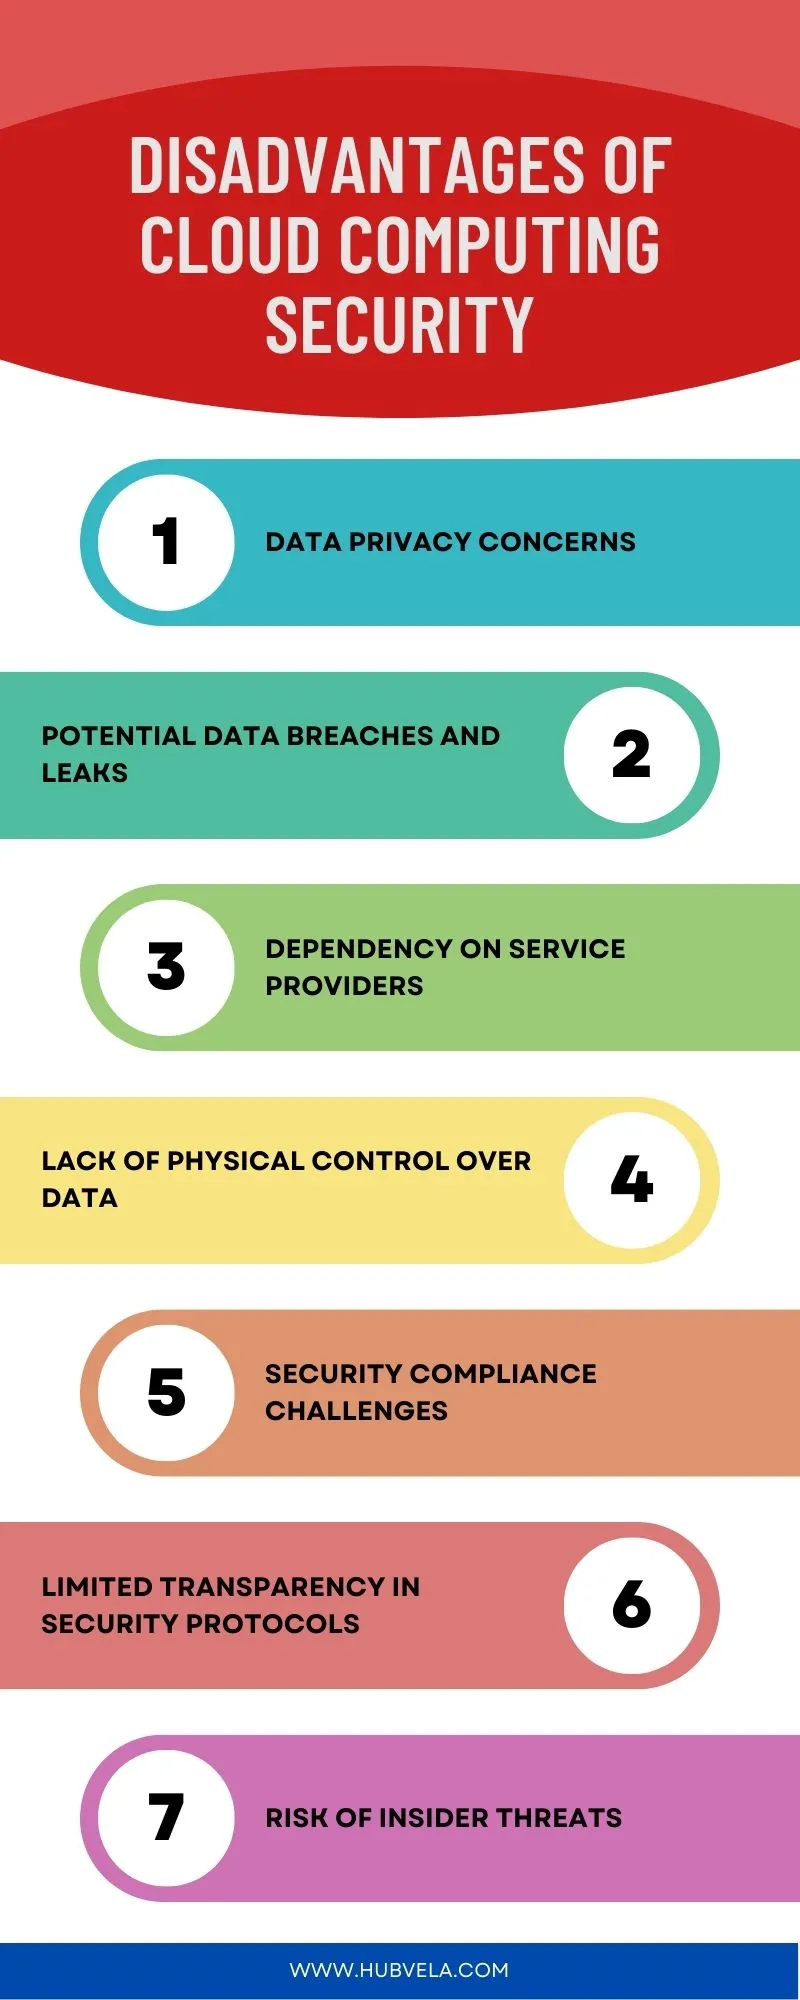 Disadvantages of Cloud Computing Security Infographic